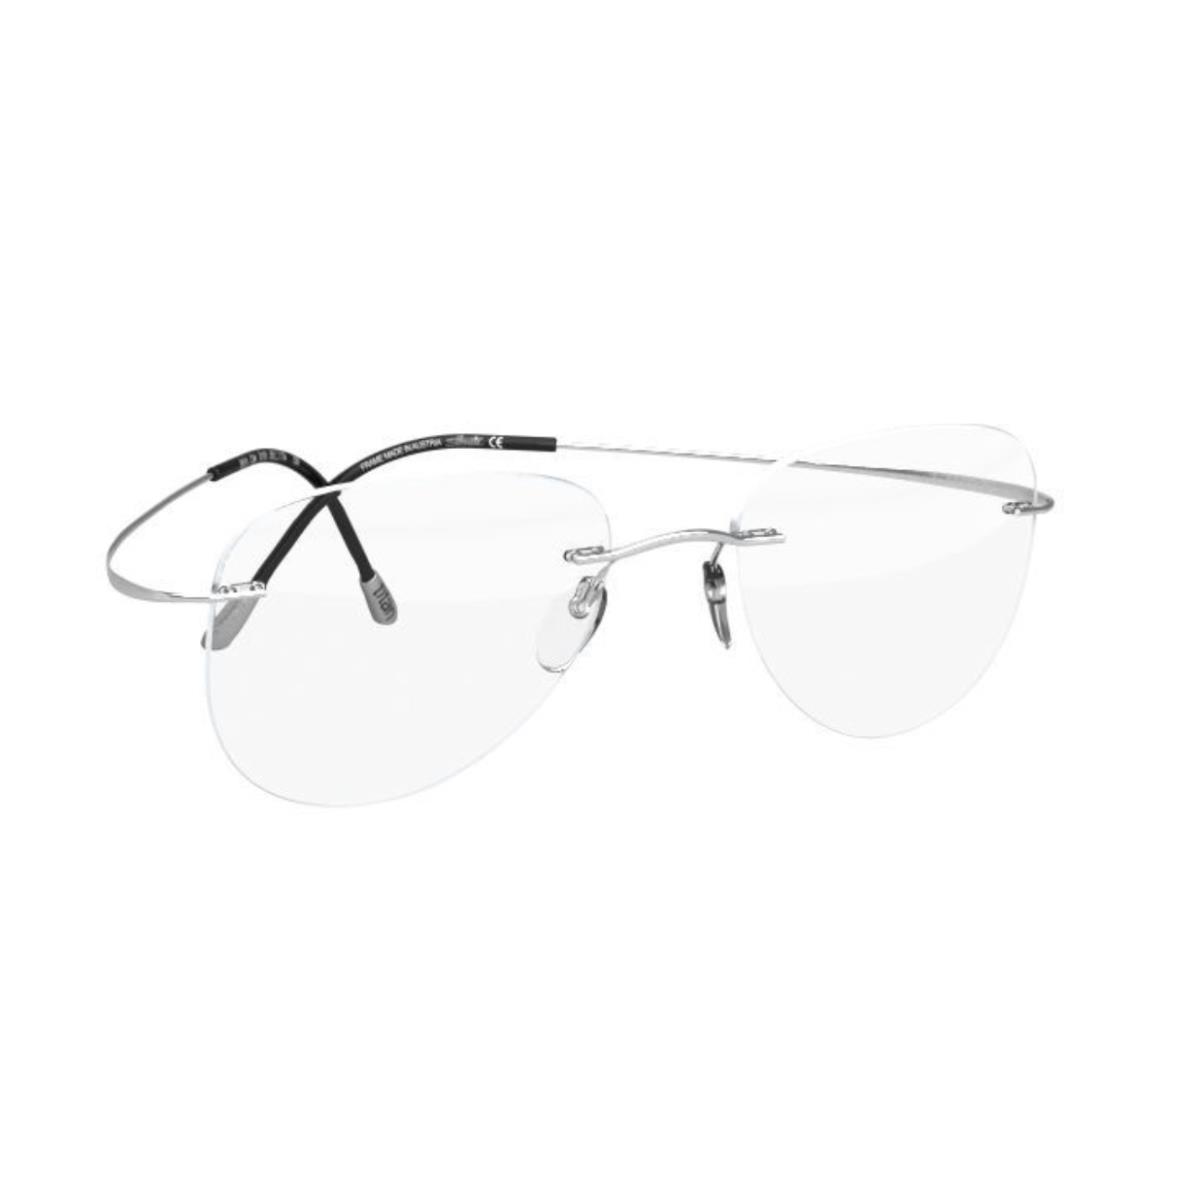 Silhouette Rimless Eyeglasses Titan Minimal Art The Must Collection Frames STERLING SILVER - 7010, SIZE: 55-17 150, SHAPE-CM